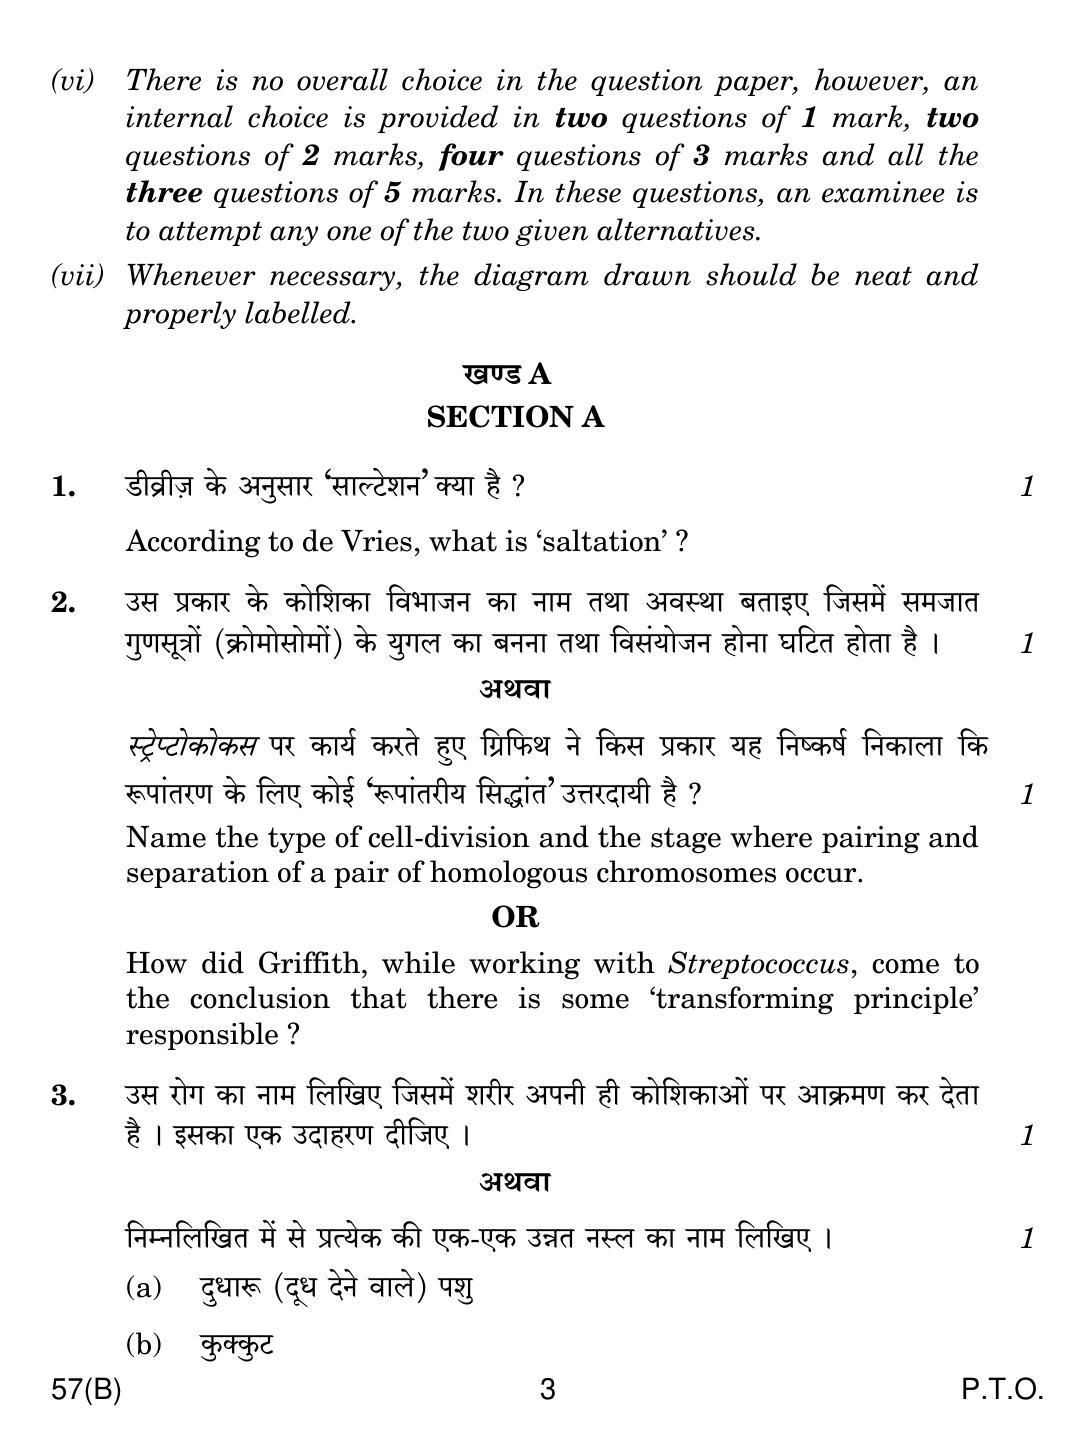 CBSE Class 12 57(B) BIOLOGY 2019 Compartment Question Paper - Page 3